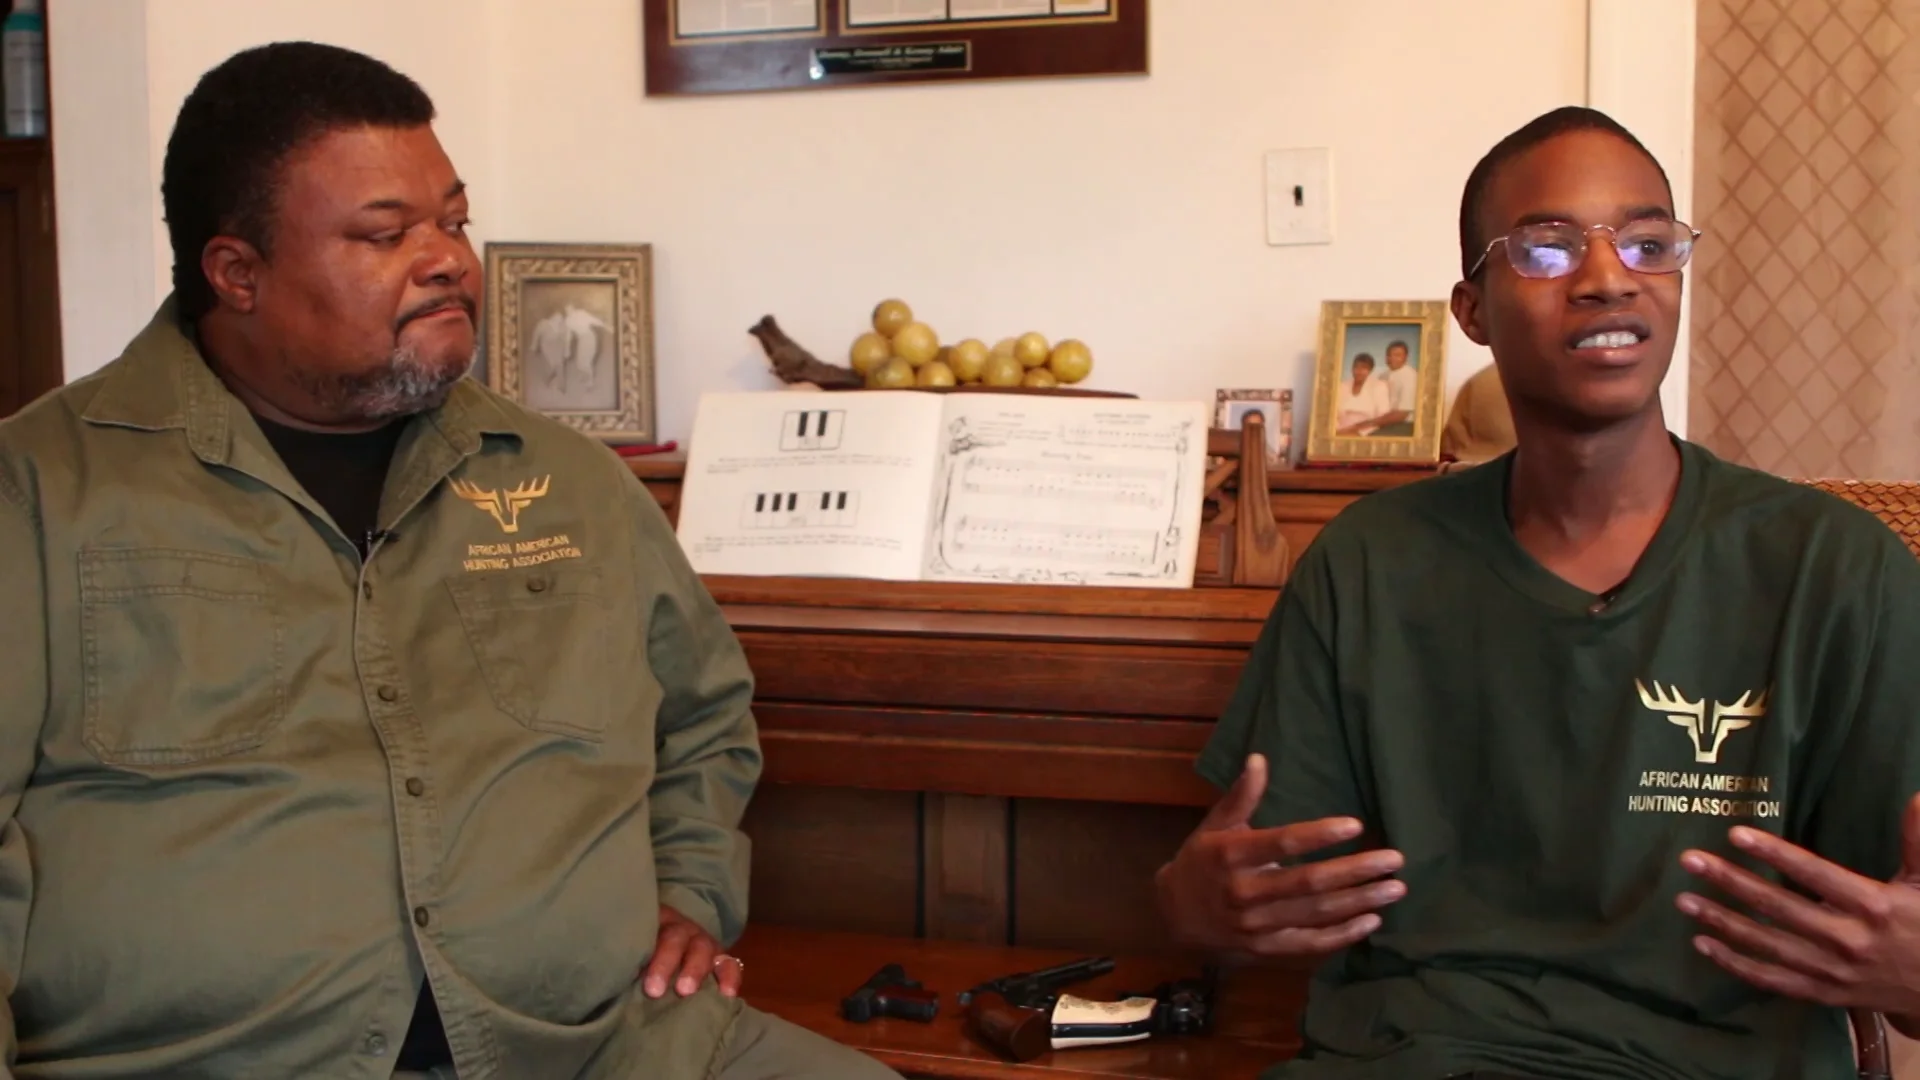 African American Hunting Association on Vimeo